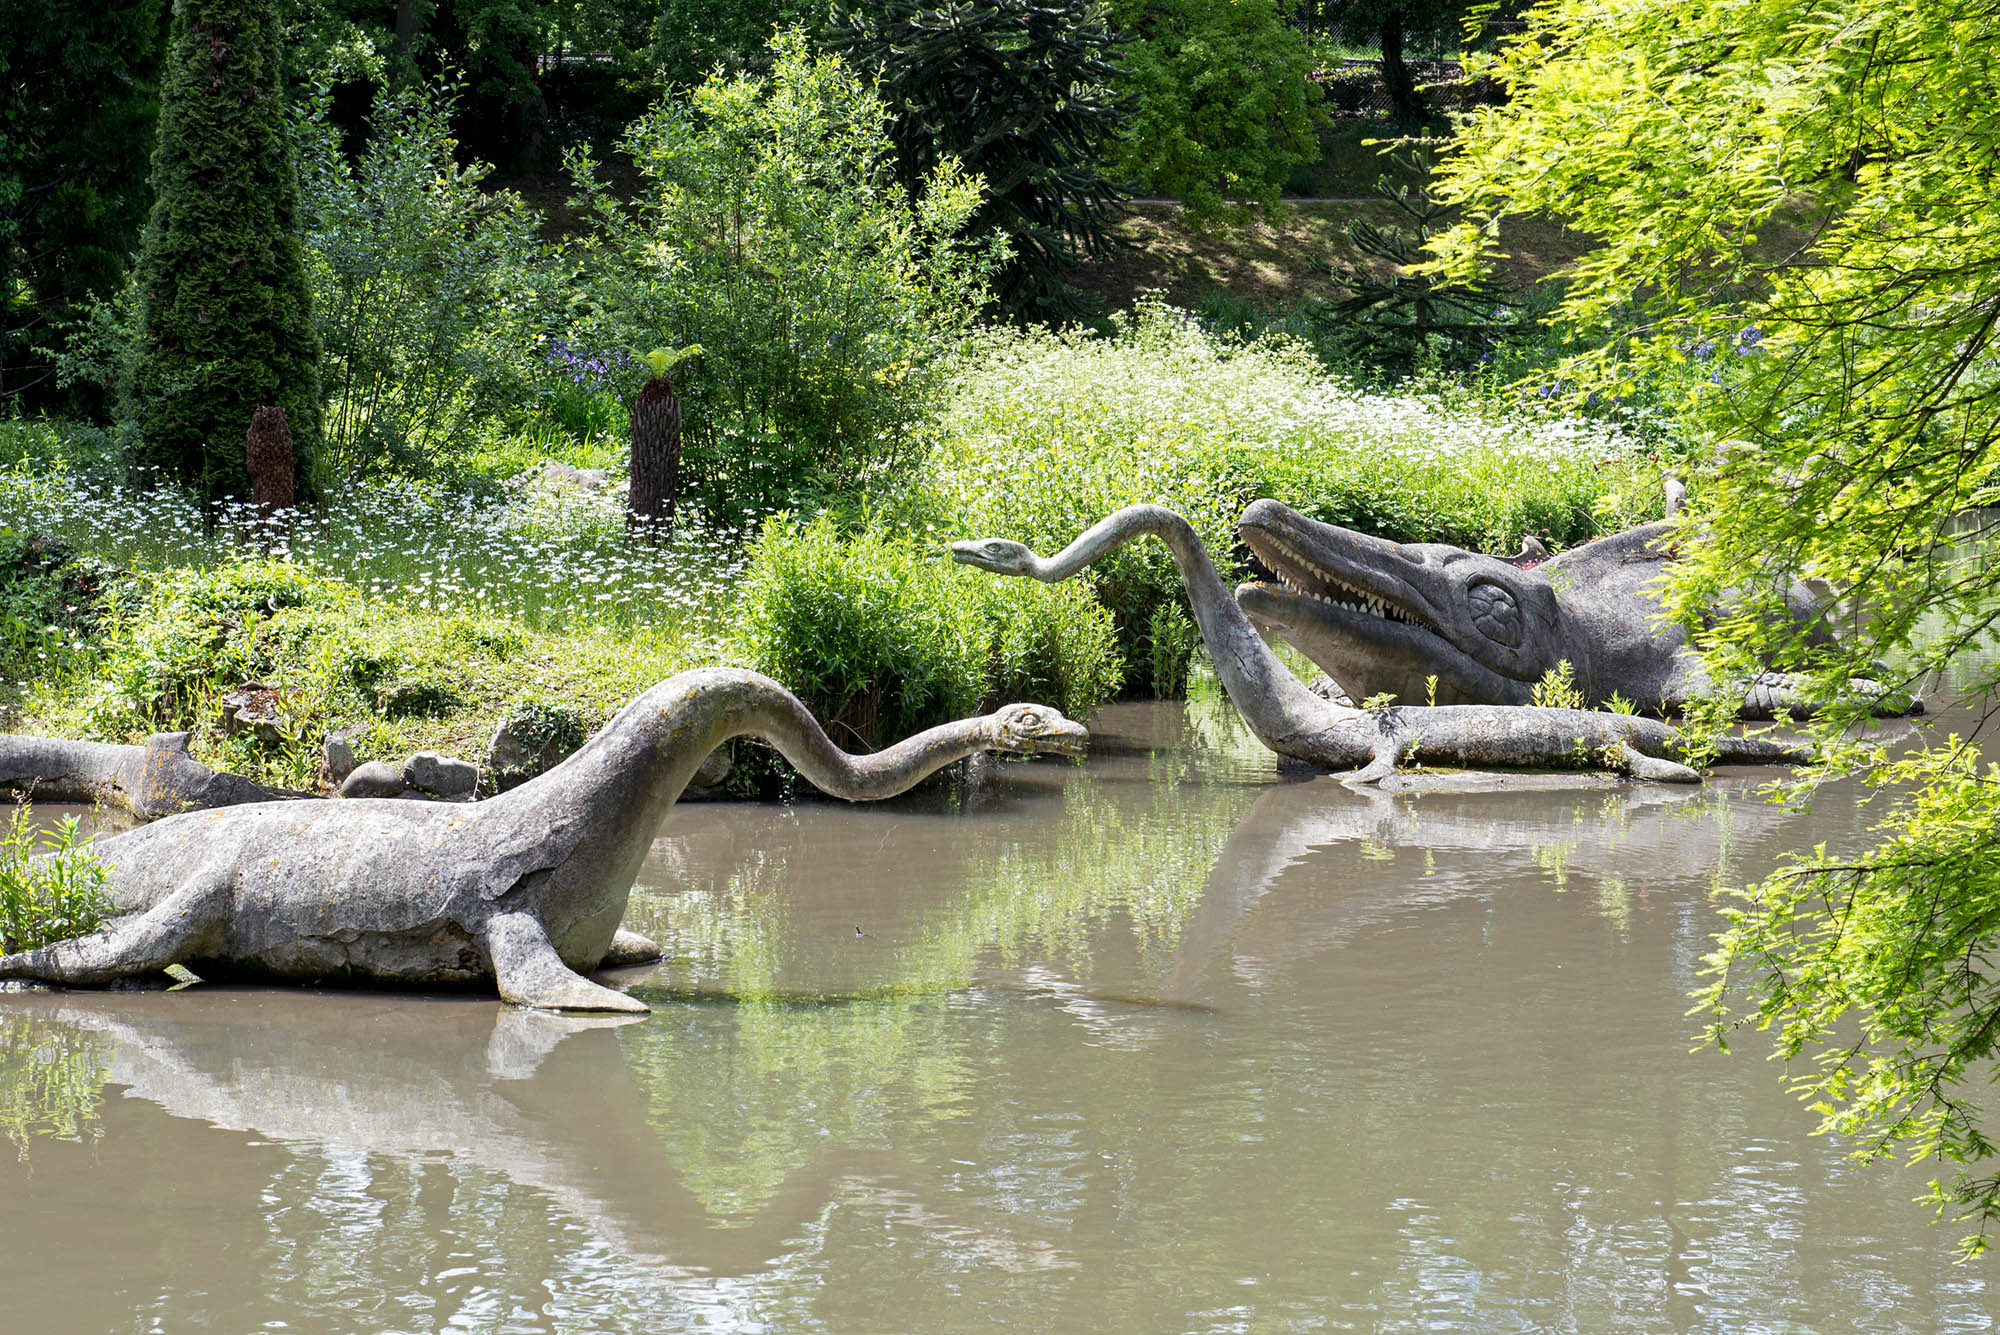 The dinosaur sculptures in the 'At Risk' Crystal Palace Park.